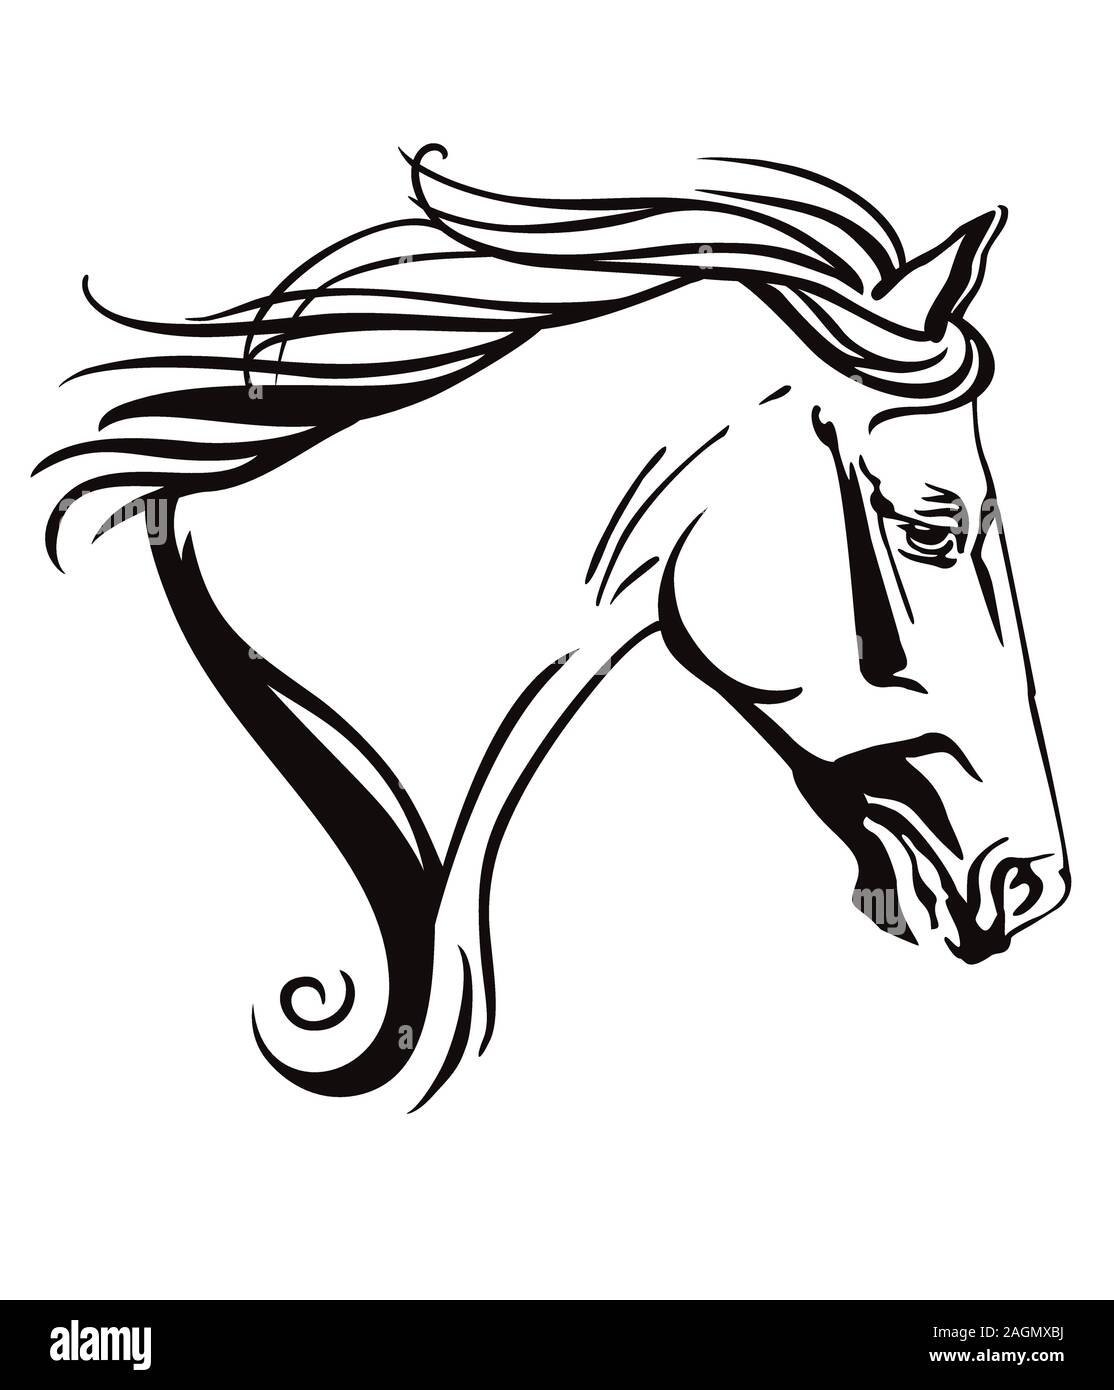 Decorative monochrome ornamental contour portrait of running horse with long mane, looking  in profile. Vector illustration in black color isolated on Stock Vector